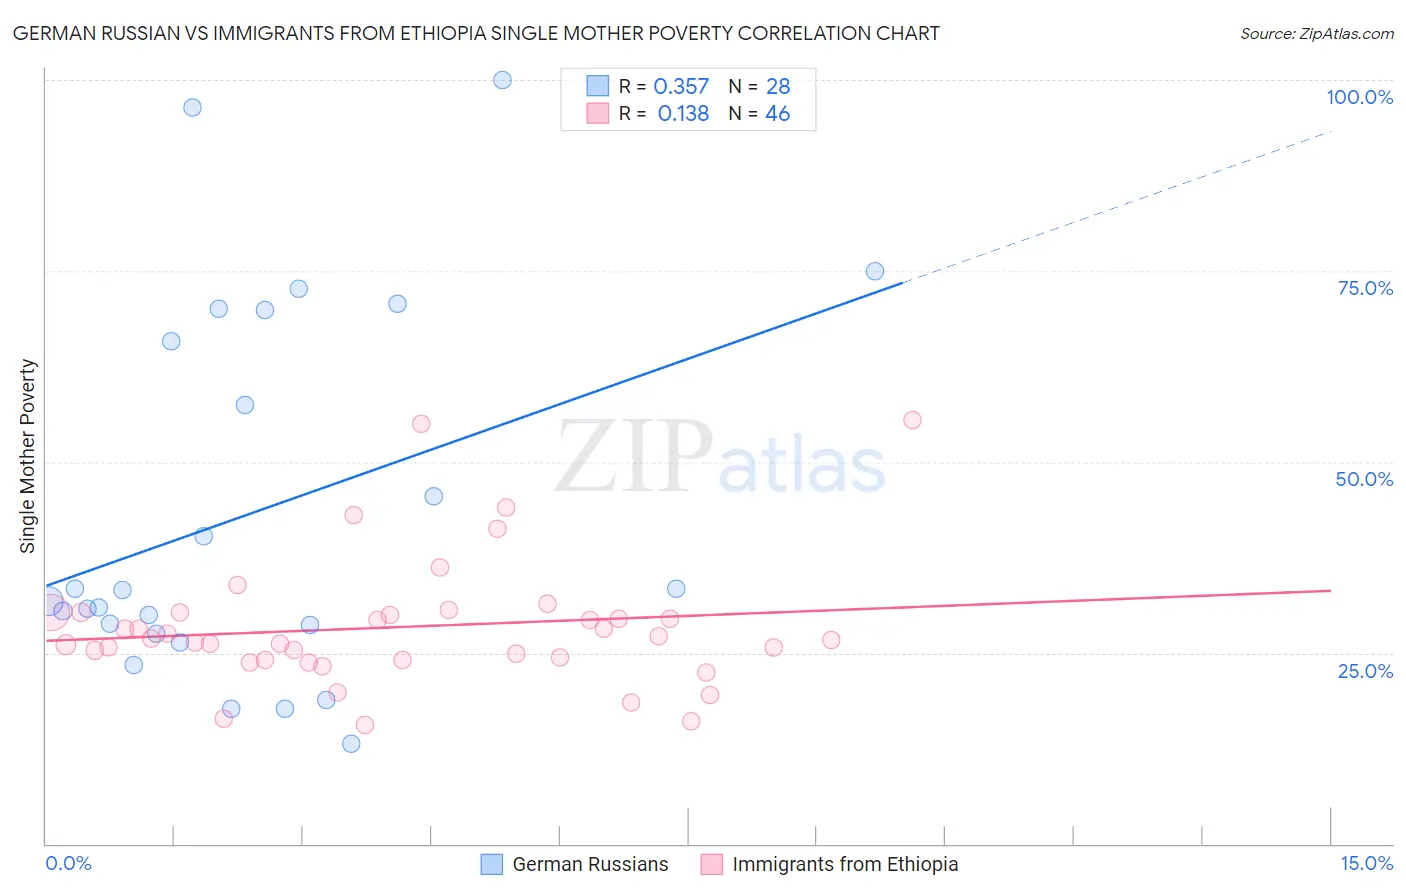 German Russian vs Immigrants from Ethiopia Single Mother Poverty